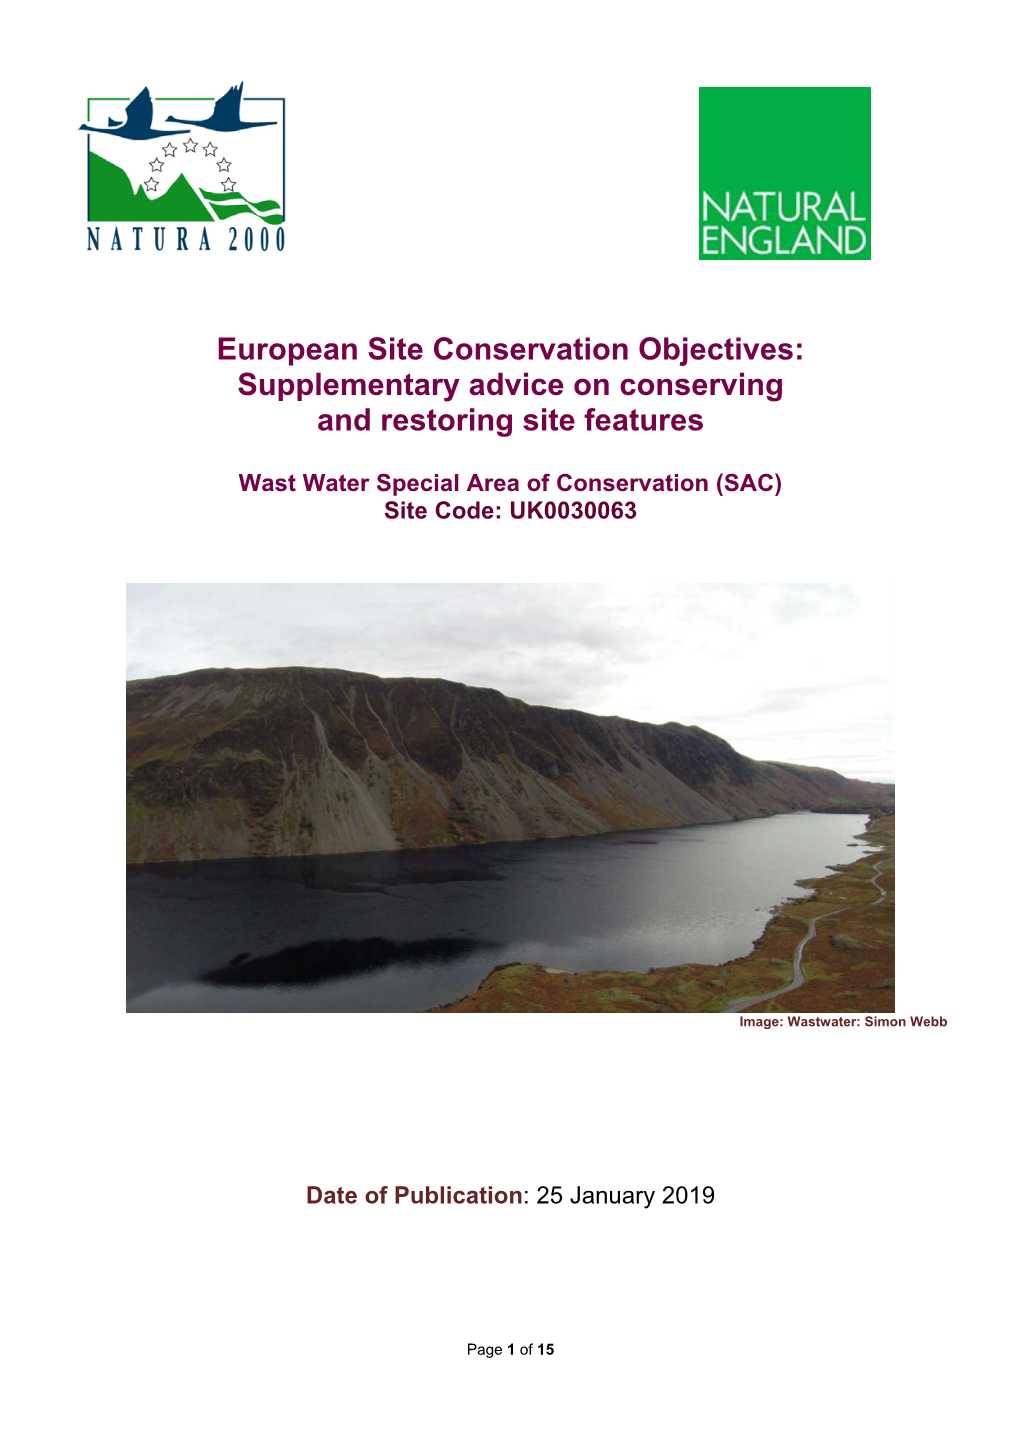 Wast Water SAC Conservation Objectives Supplementary Advice